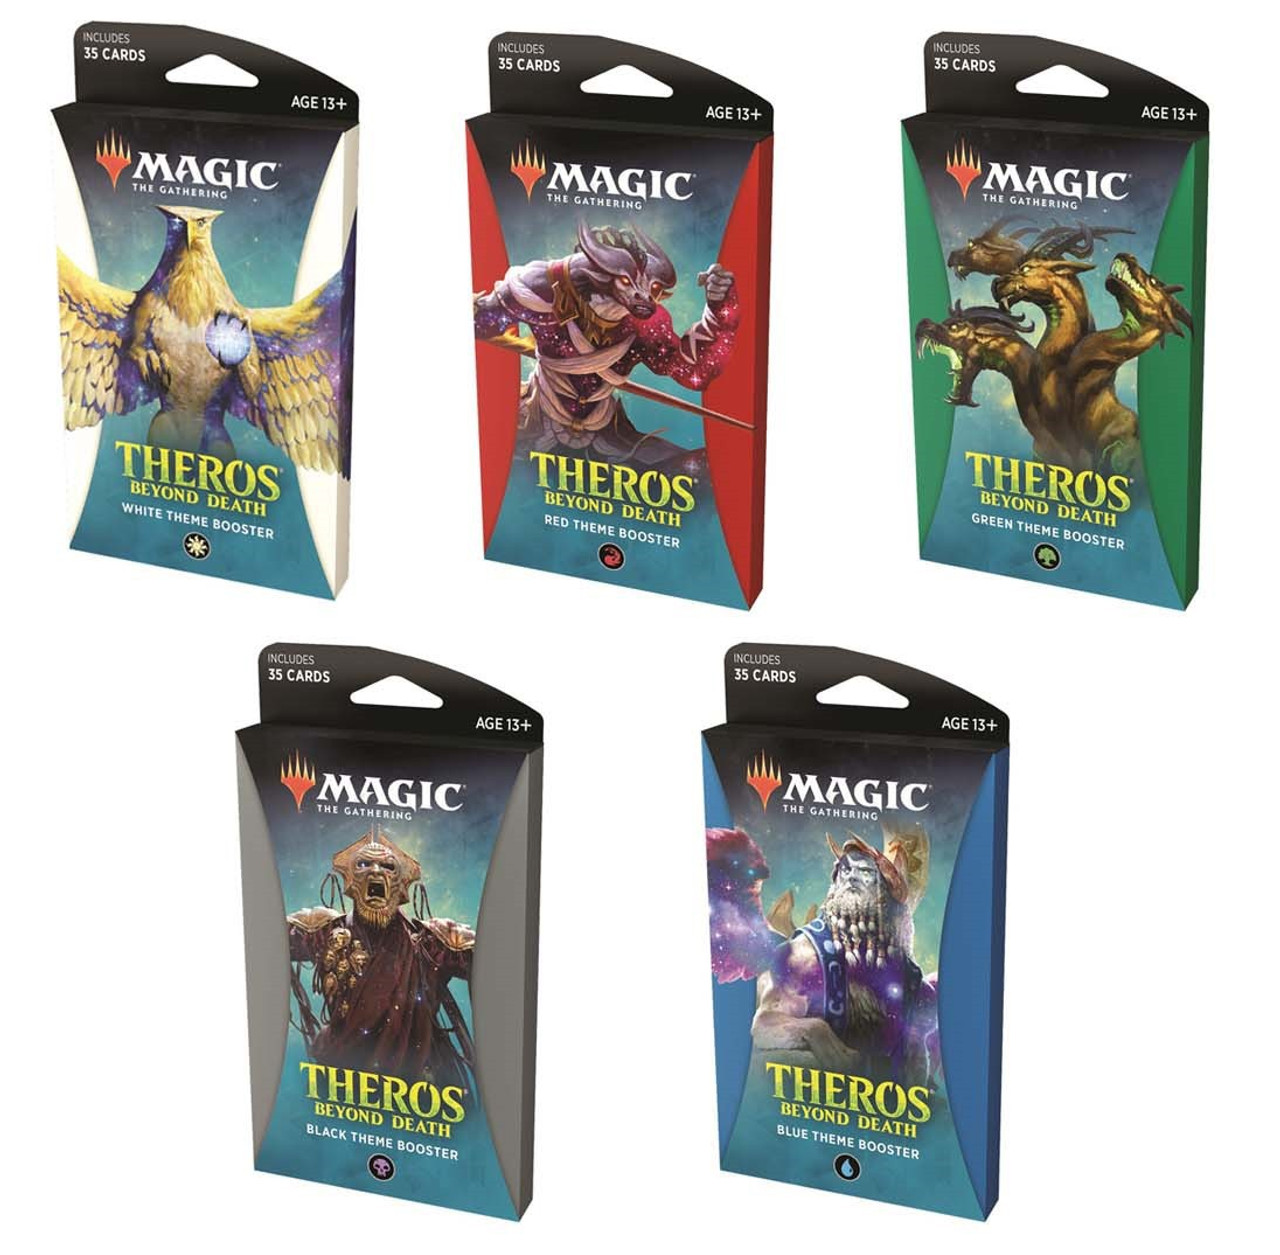 Magic The Gathering Trading Card Game Theros Beyond Death Set Of All 5 Theme Boosters Wizards Of The Coast Toywiz - beyond codes roblox october 2018 video how to get